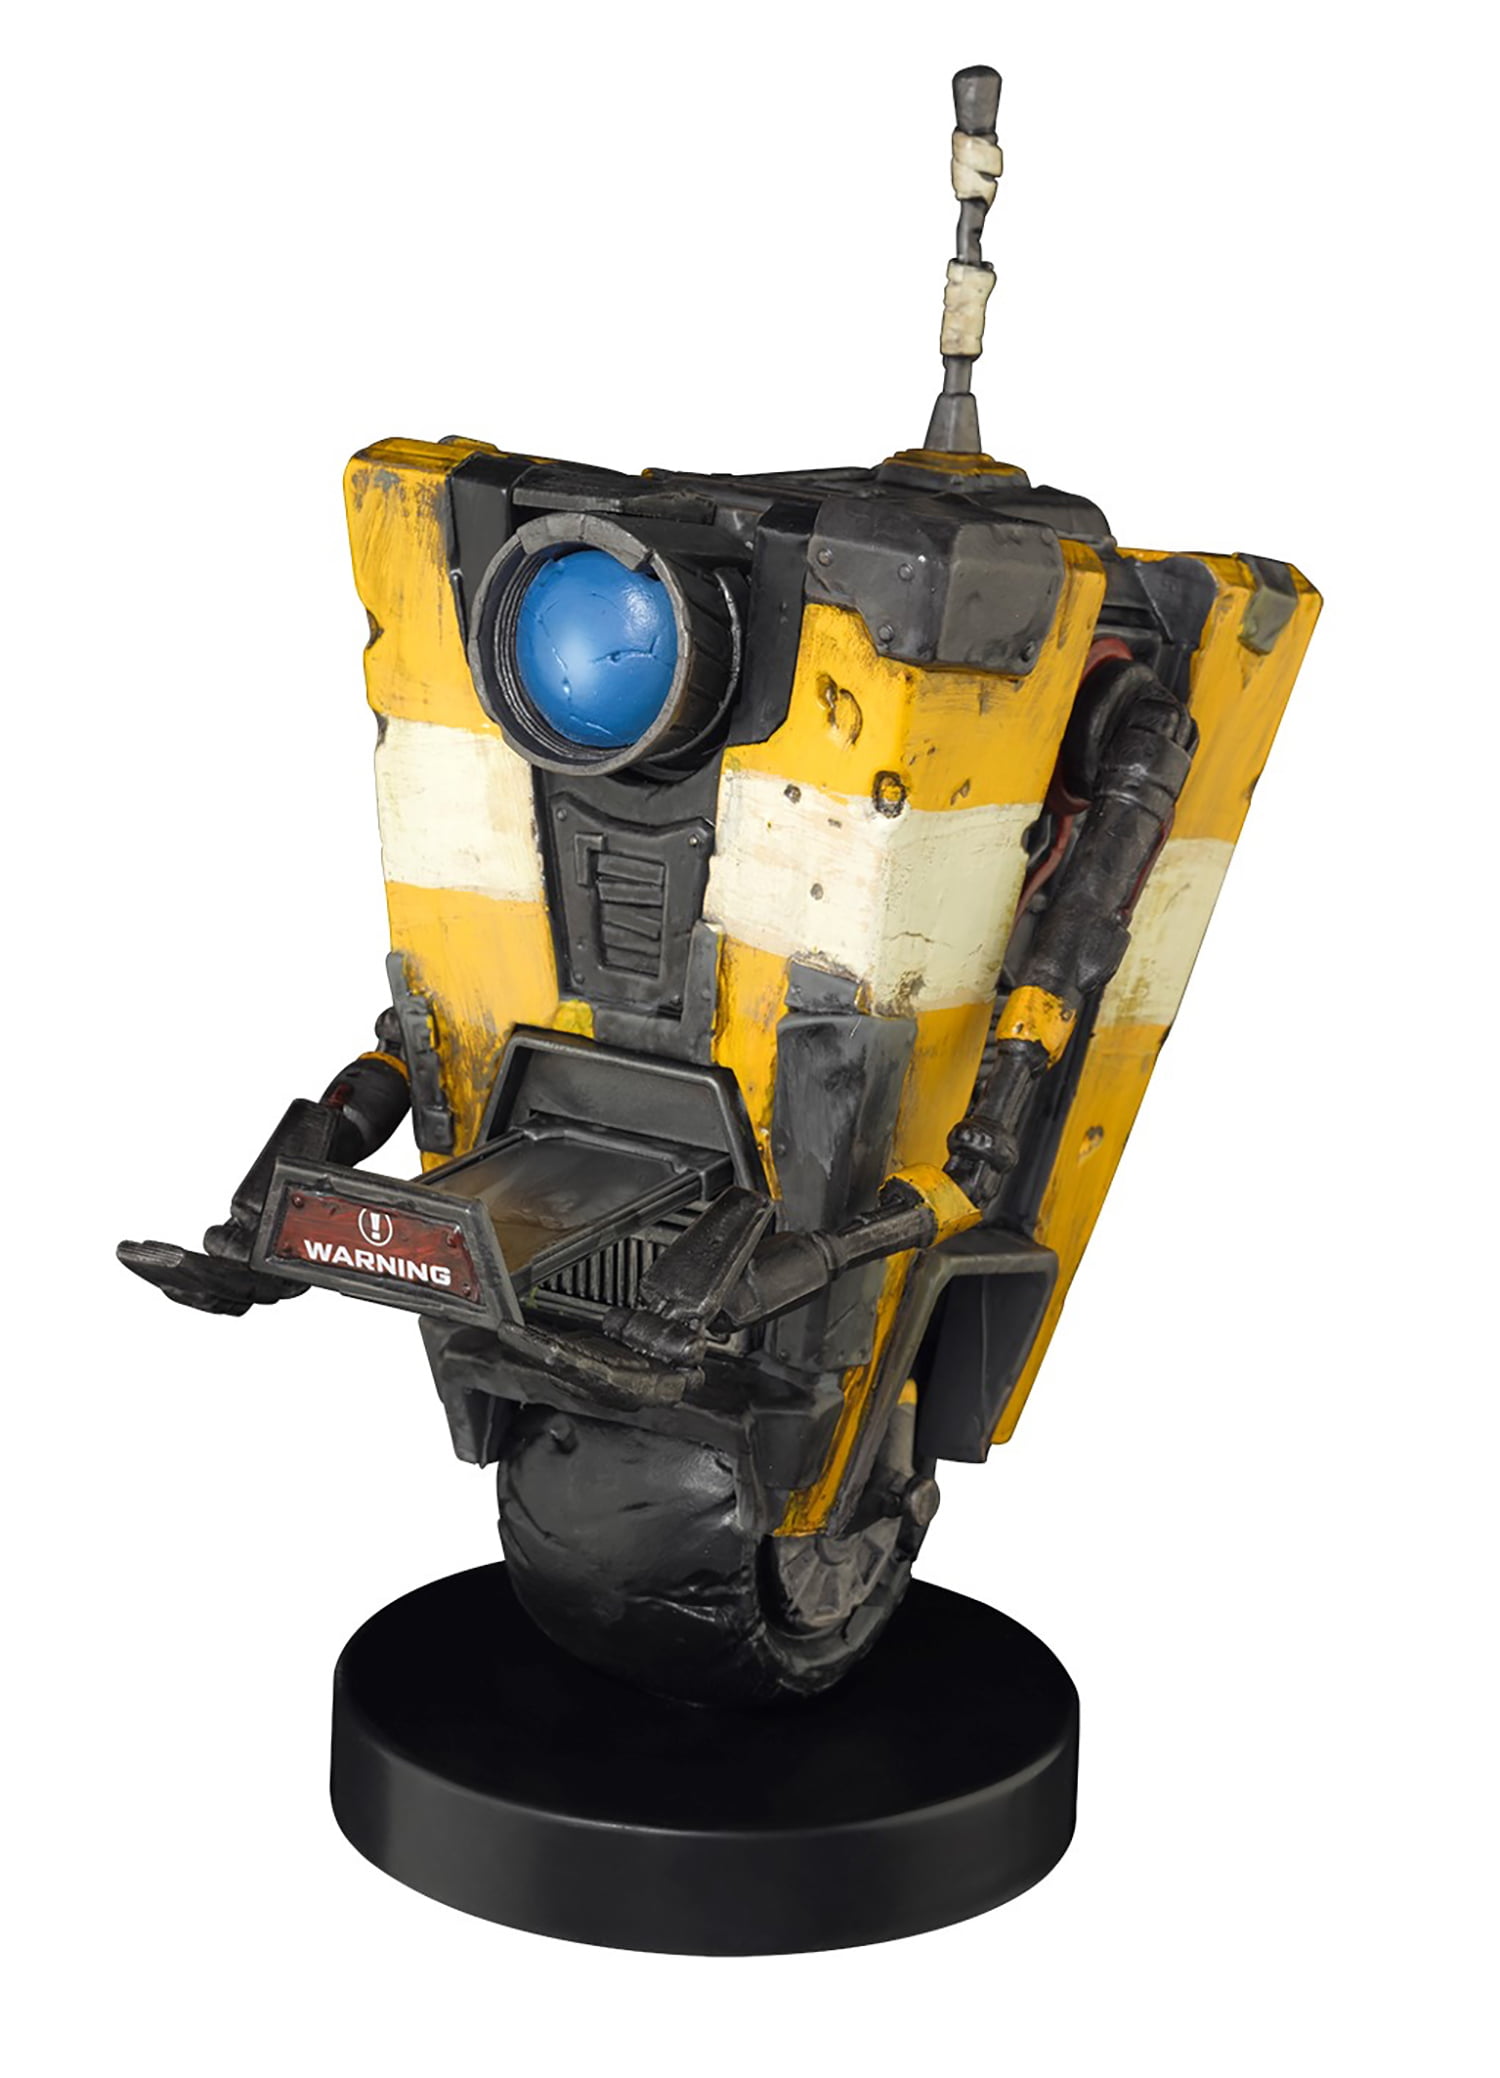 Borderlands Claptrap Xbox 360 Exquisite Gaming Cable Guy Charging Controller and Device Holder Toy 